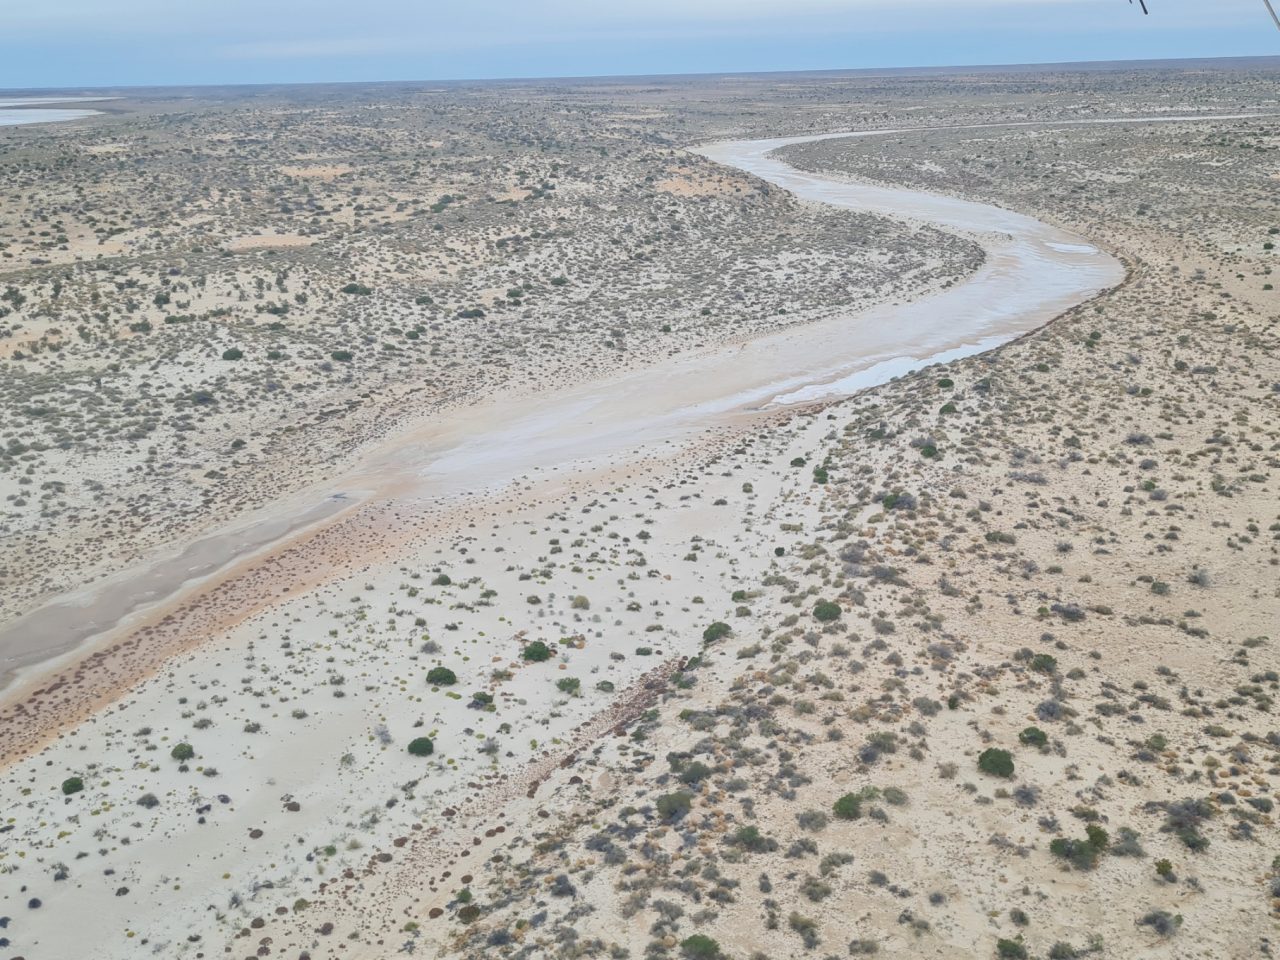 Aerial photo of large creek bed meandering across the desert landscape with a few remaining patches or puddles of water.